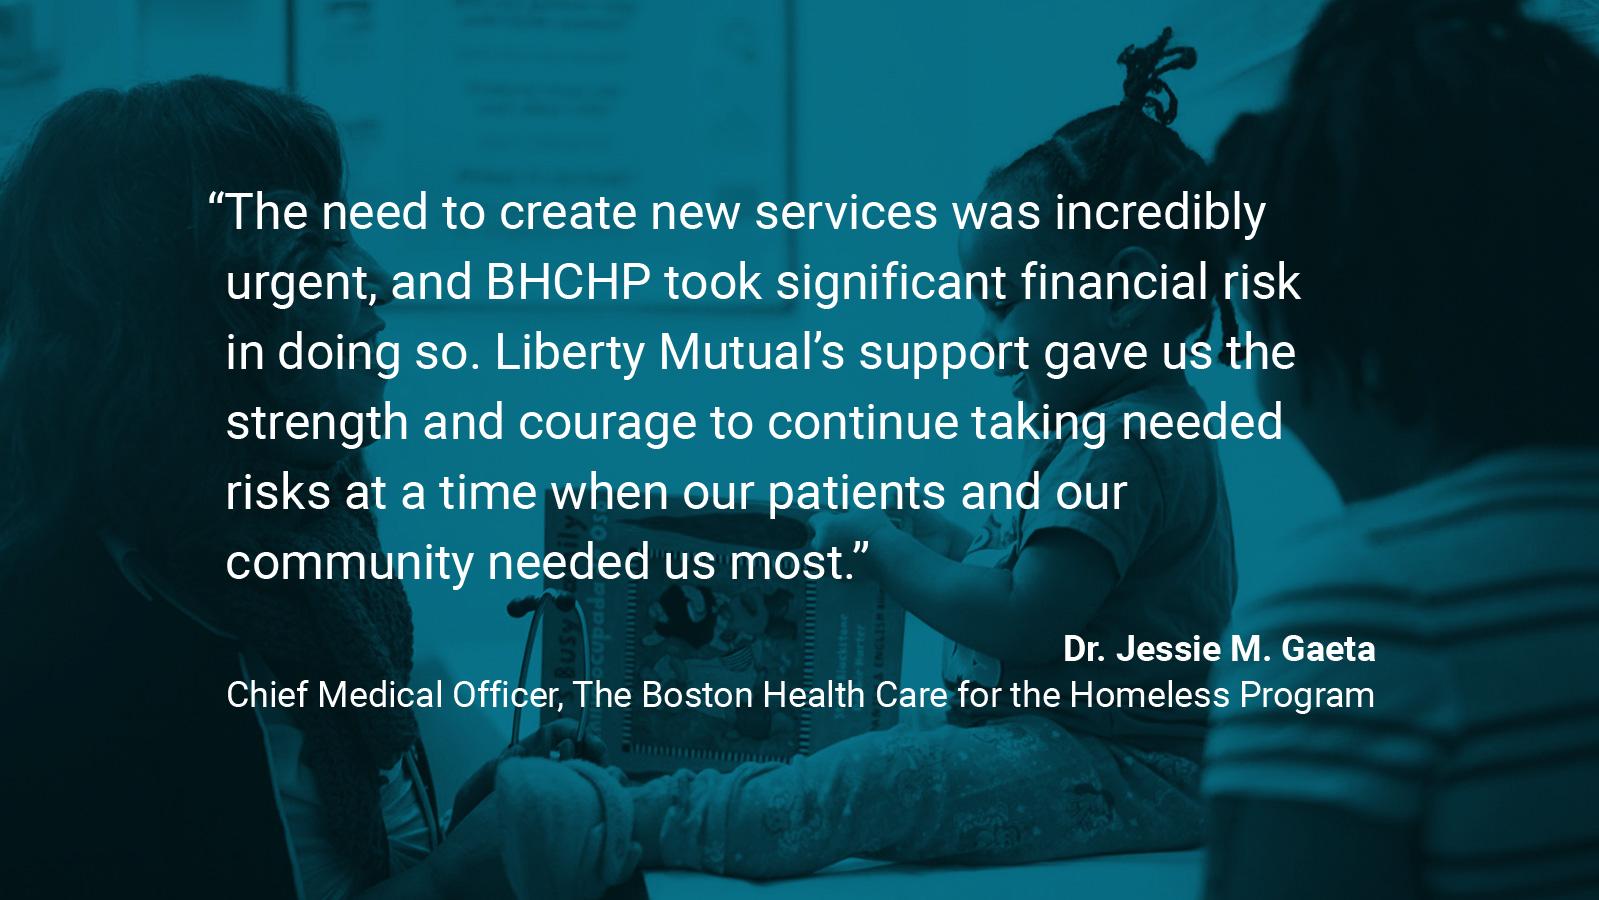 (slide 1 of 4) Boston Health Care for the Homeless Program   Quote by: Dr. Jessie M. Gaeta, Chief Medical Officer at Boston Health Care for the Homeless Program: “The need to create new services was incredibly urgent, and BHCHP took significant financial risk in doing so. Liberty Mutual’s support gave us the strength and courage to continue taking needed risks at a time when our patients and our community needed us most.”   . 